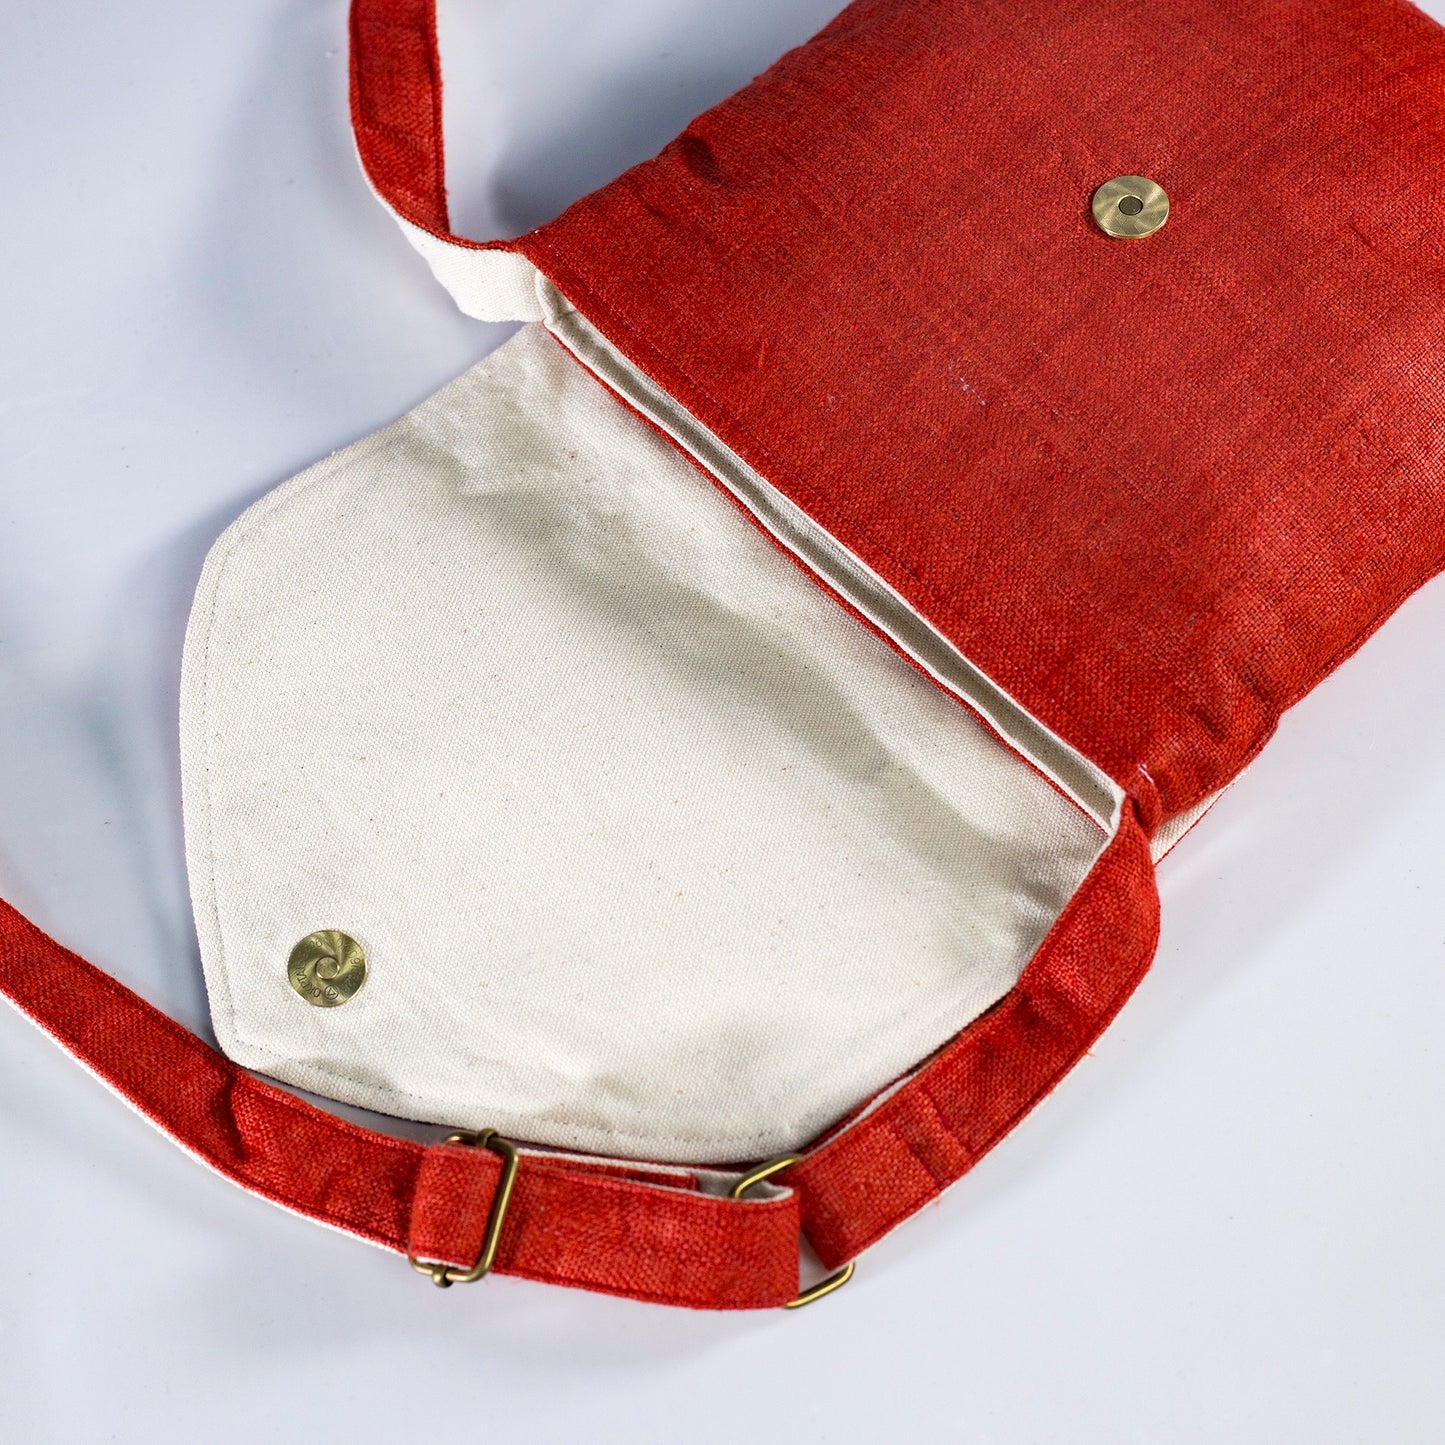 Purity Collection: Cross-body bag, natural hemp in RED, vintage patch